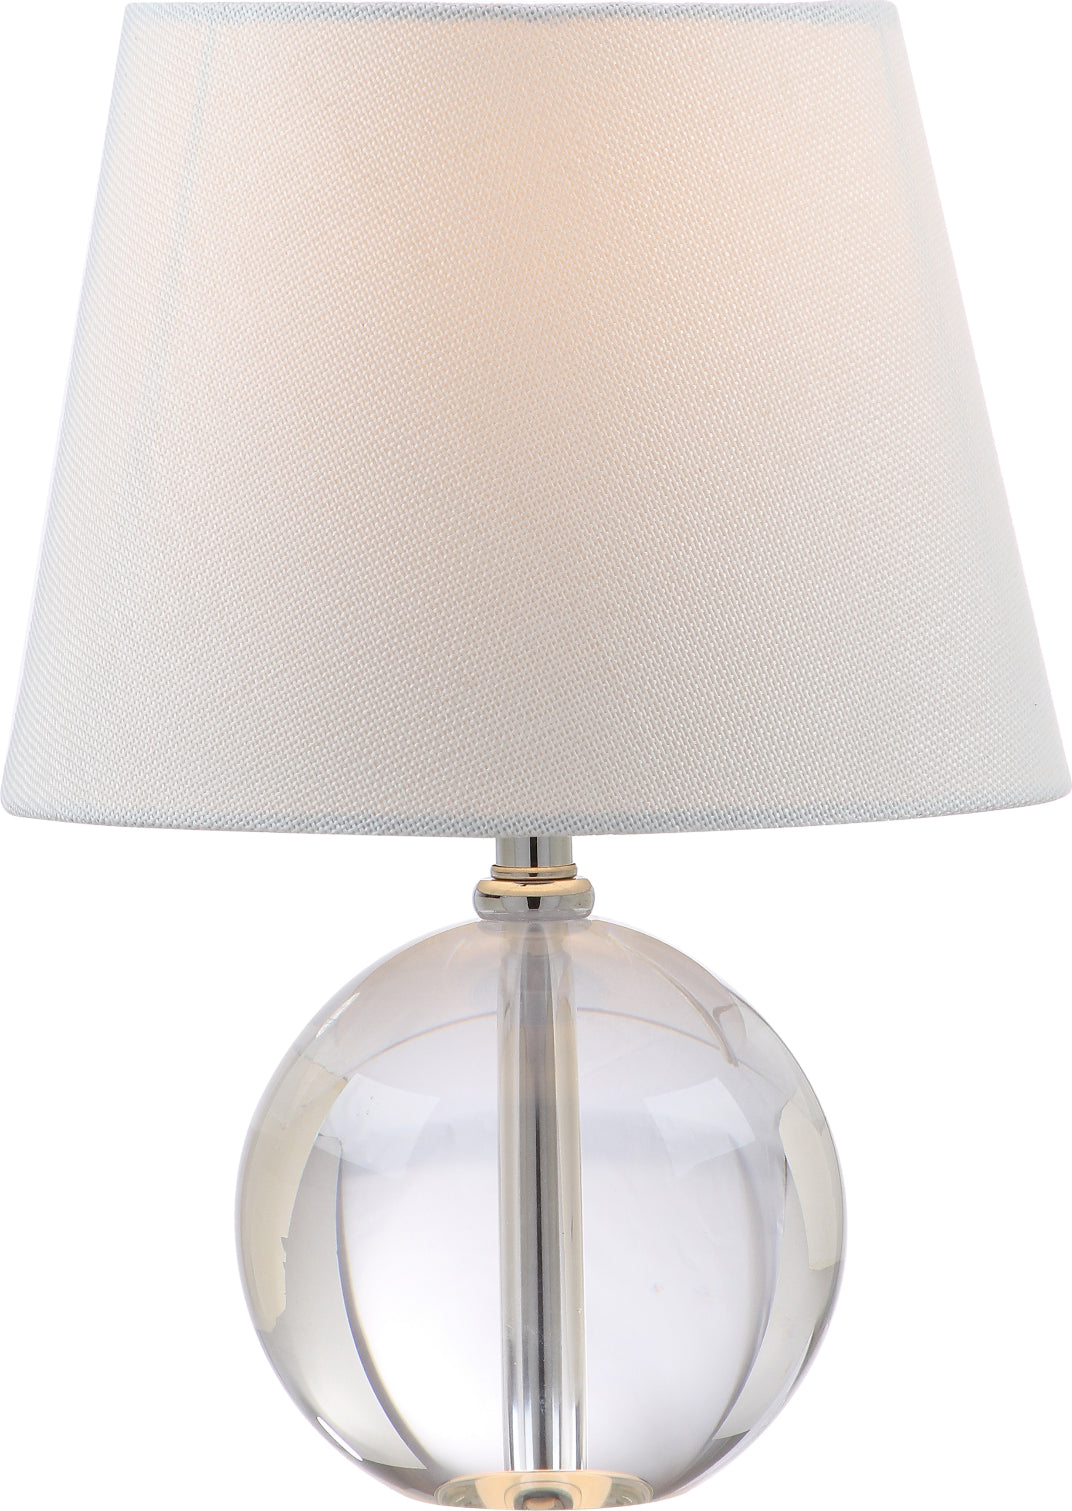 Safavieh Mable 14-Inch H Table Lamp Clear main image